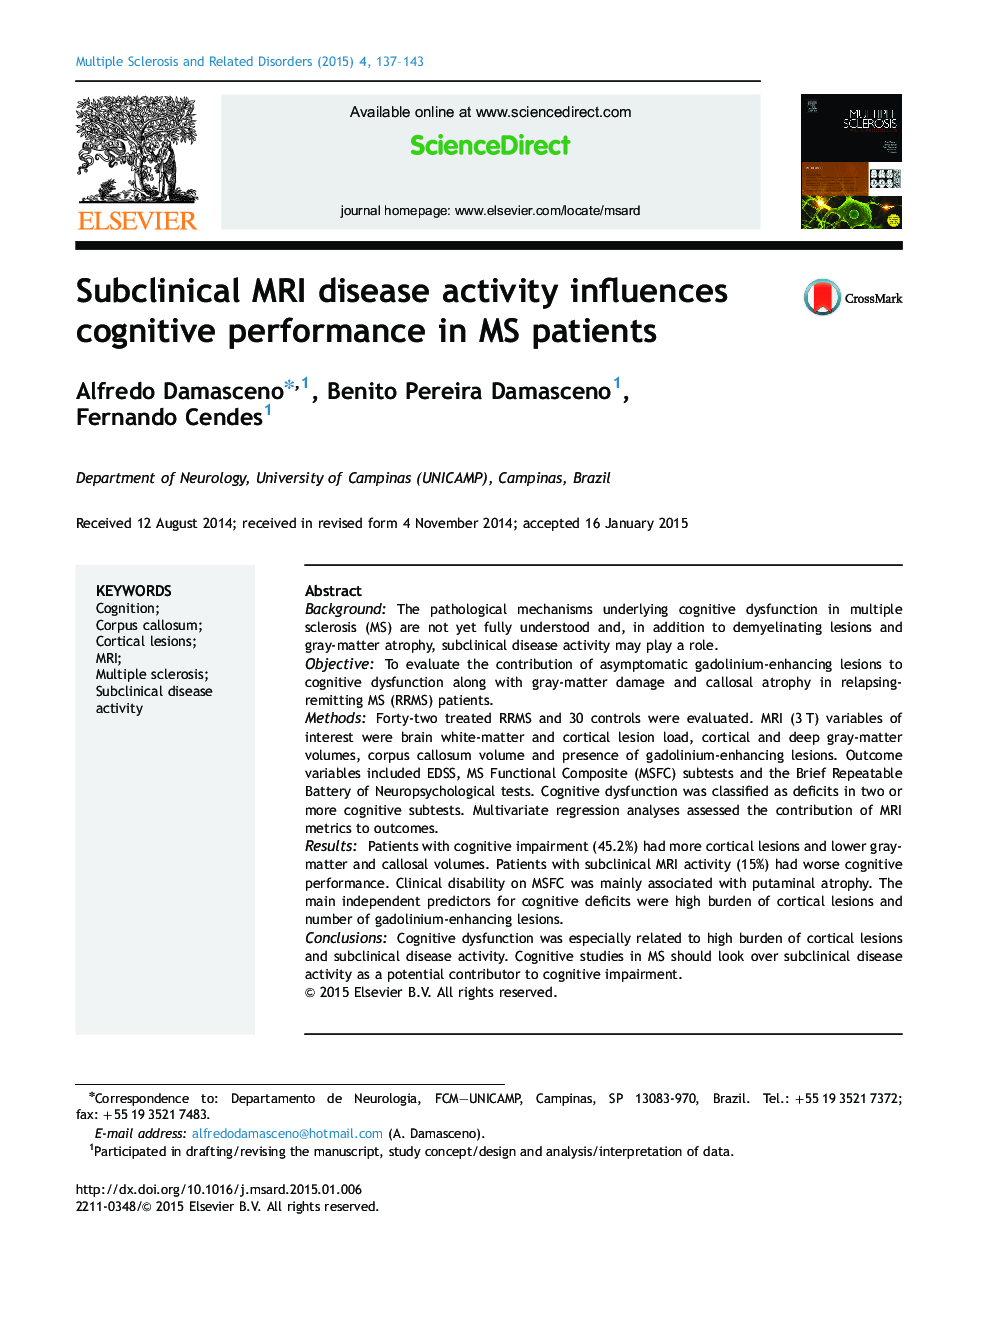 Subclinical MRI disease activity influences cognitive performance in MS patients